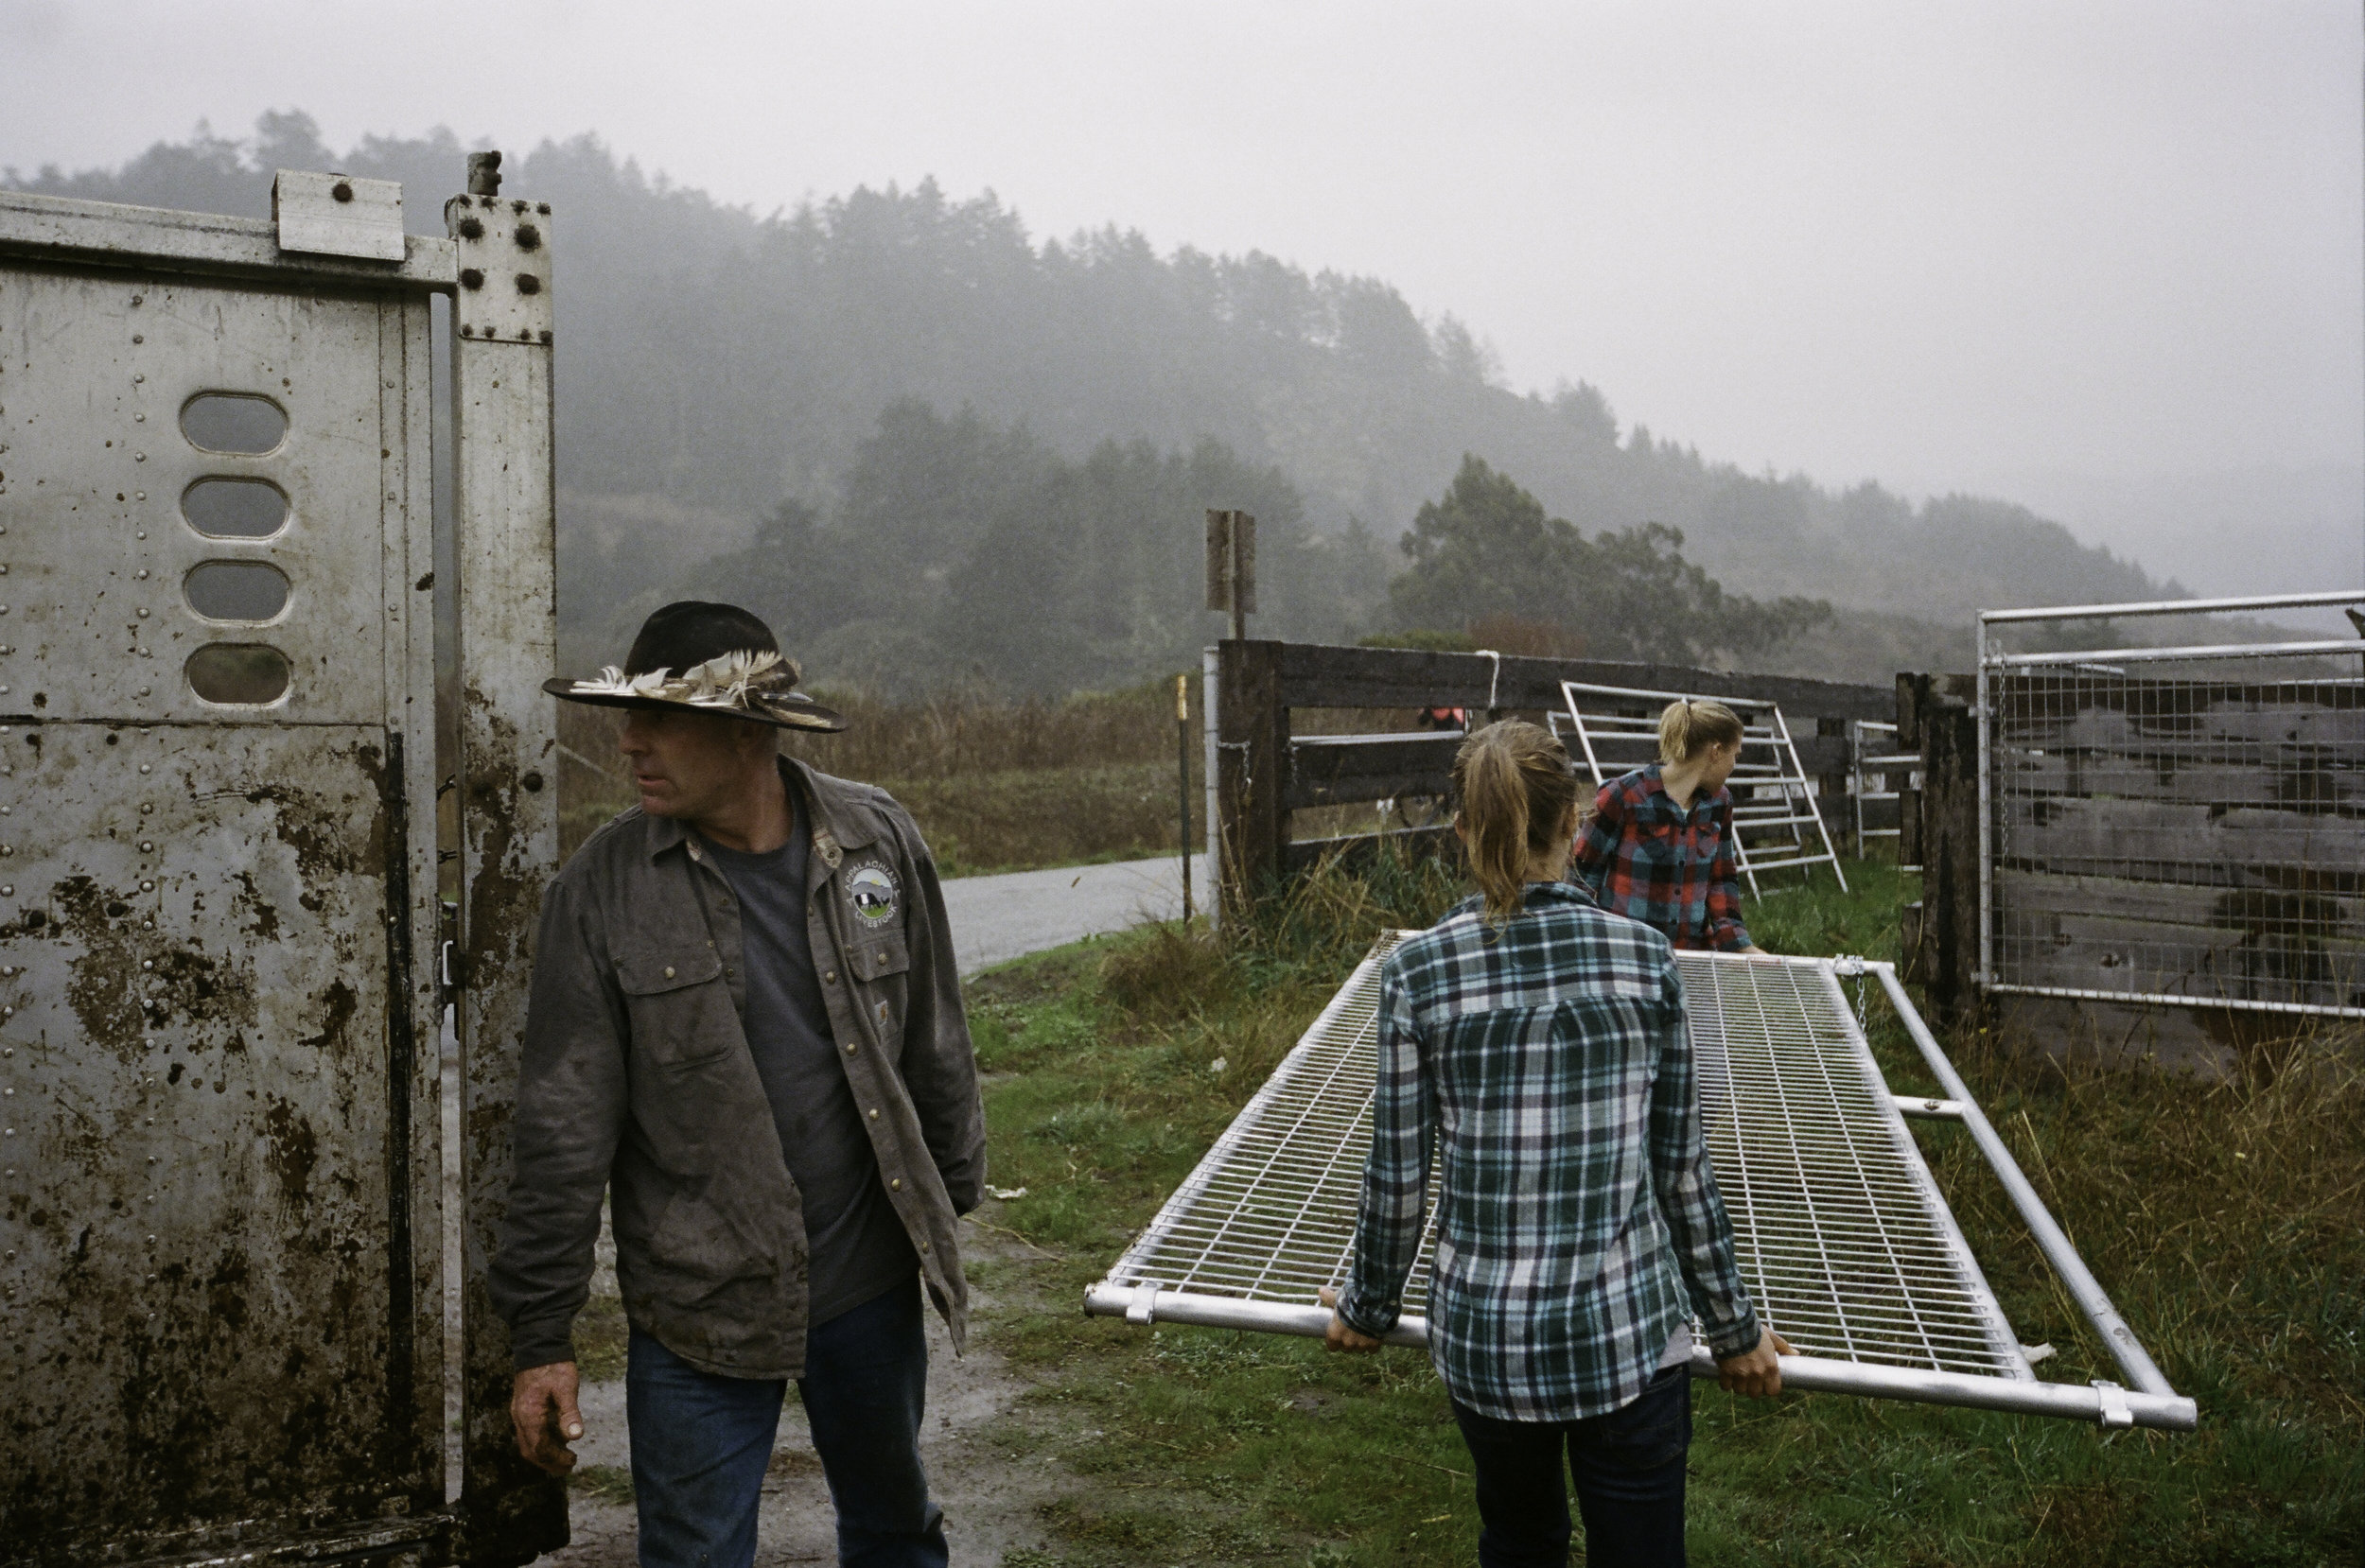  Erik, Johanna, and Ruth work to quickly unload fencing in the rain. -&nbsp;San Gregorio, CA 